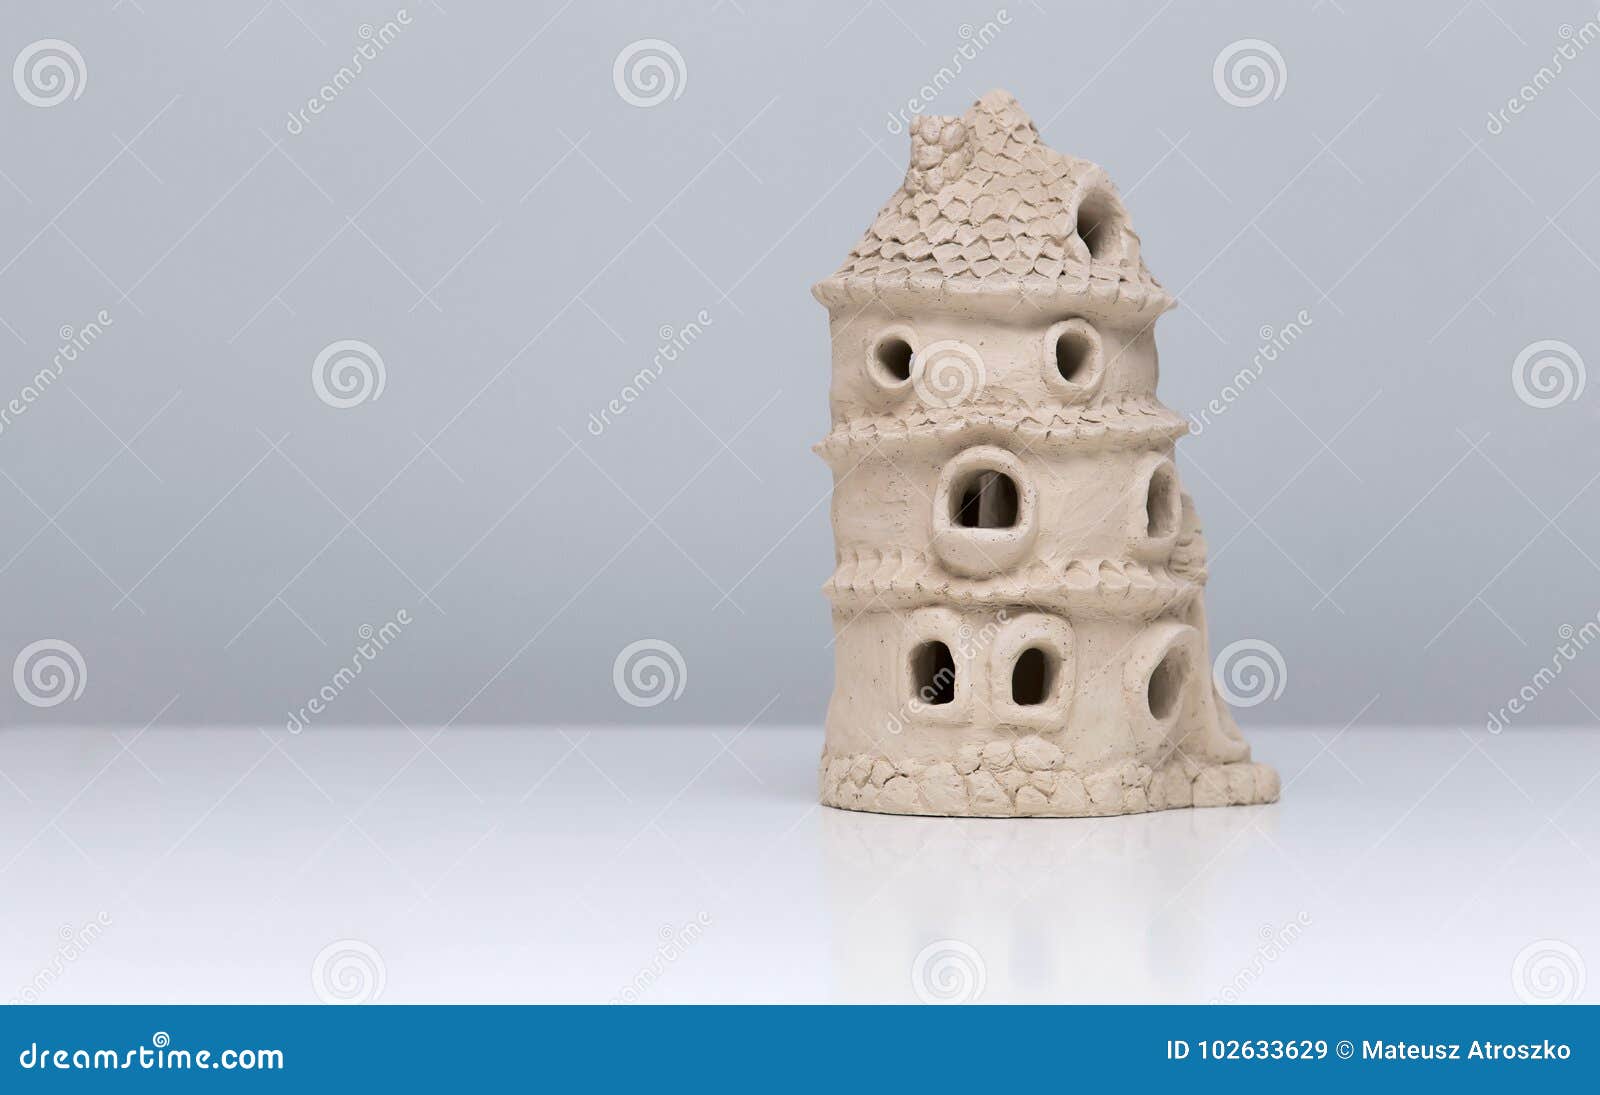  Ceramic Doll  House  Made Of Clay Stock Image Image of 